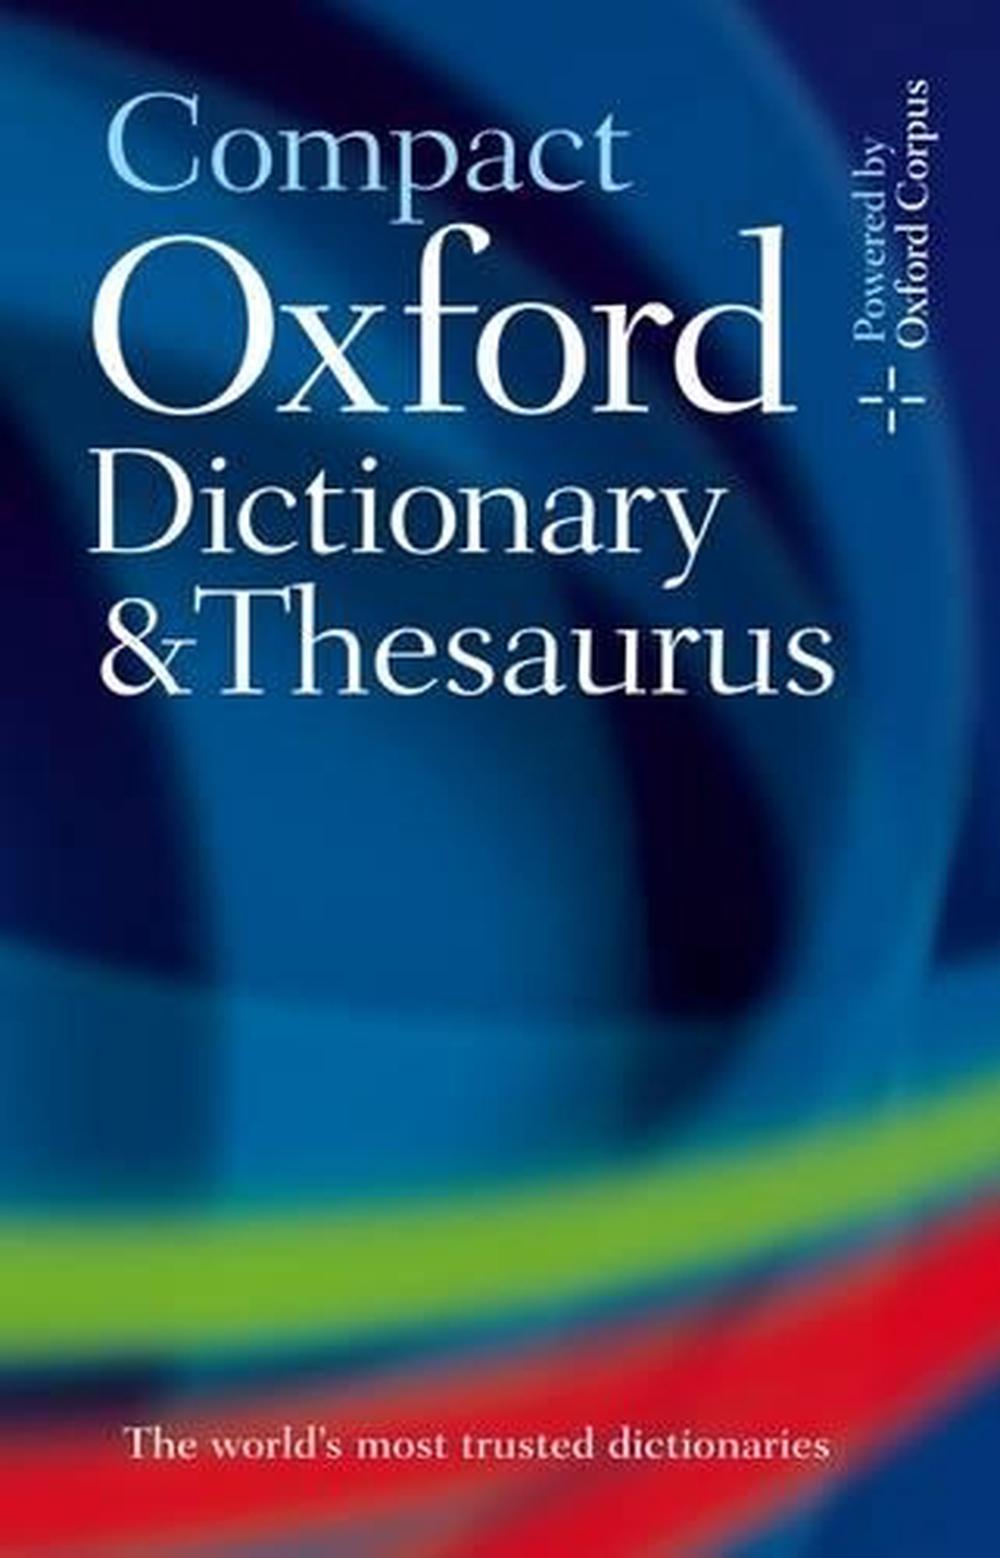 how to run oxford dictionary without cd